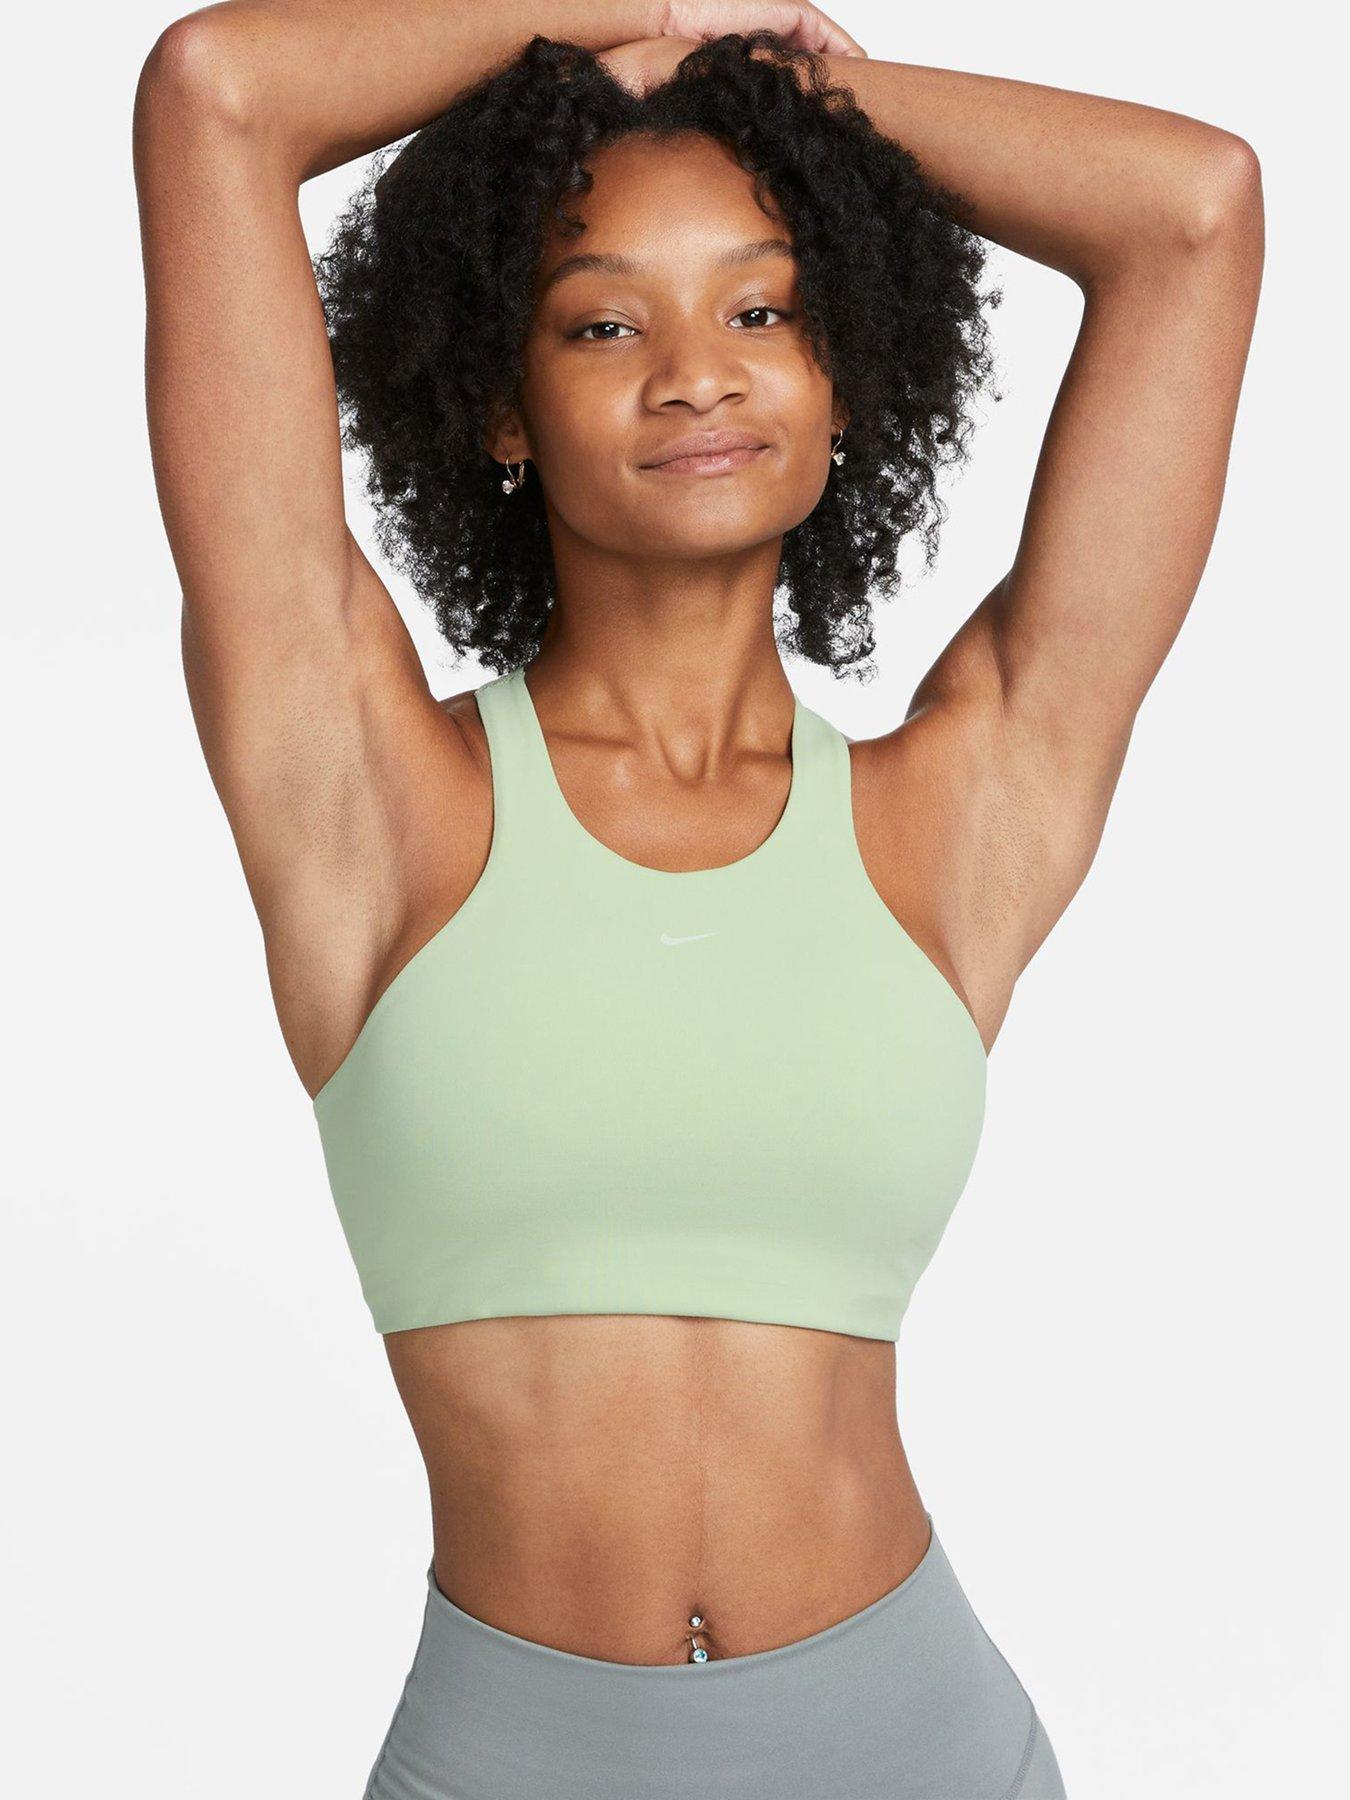 The Best Nike Sports Bras for Yoga . Nike BE